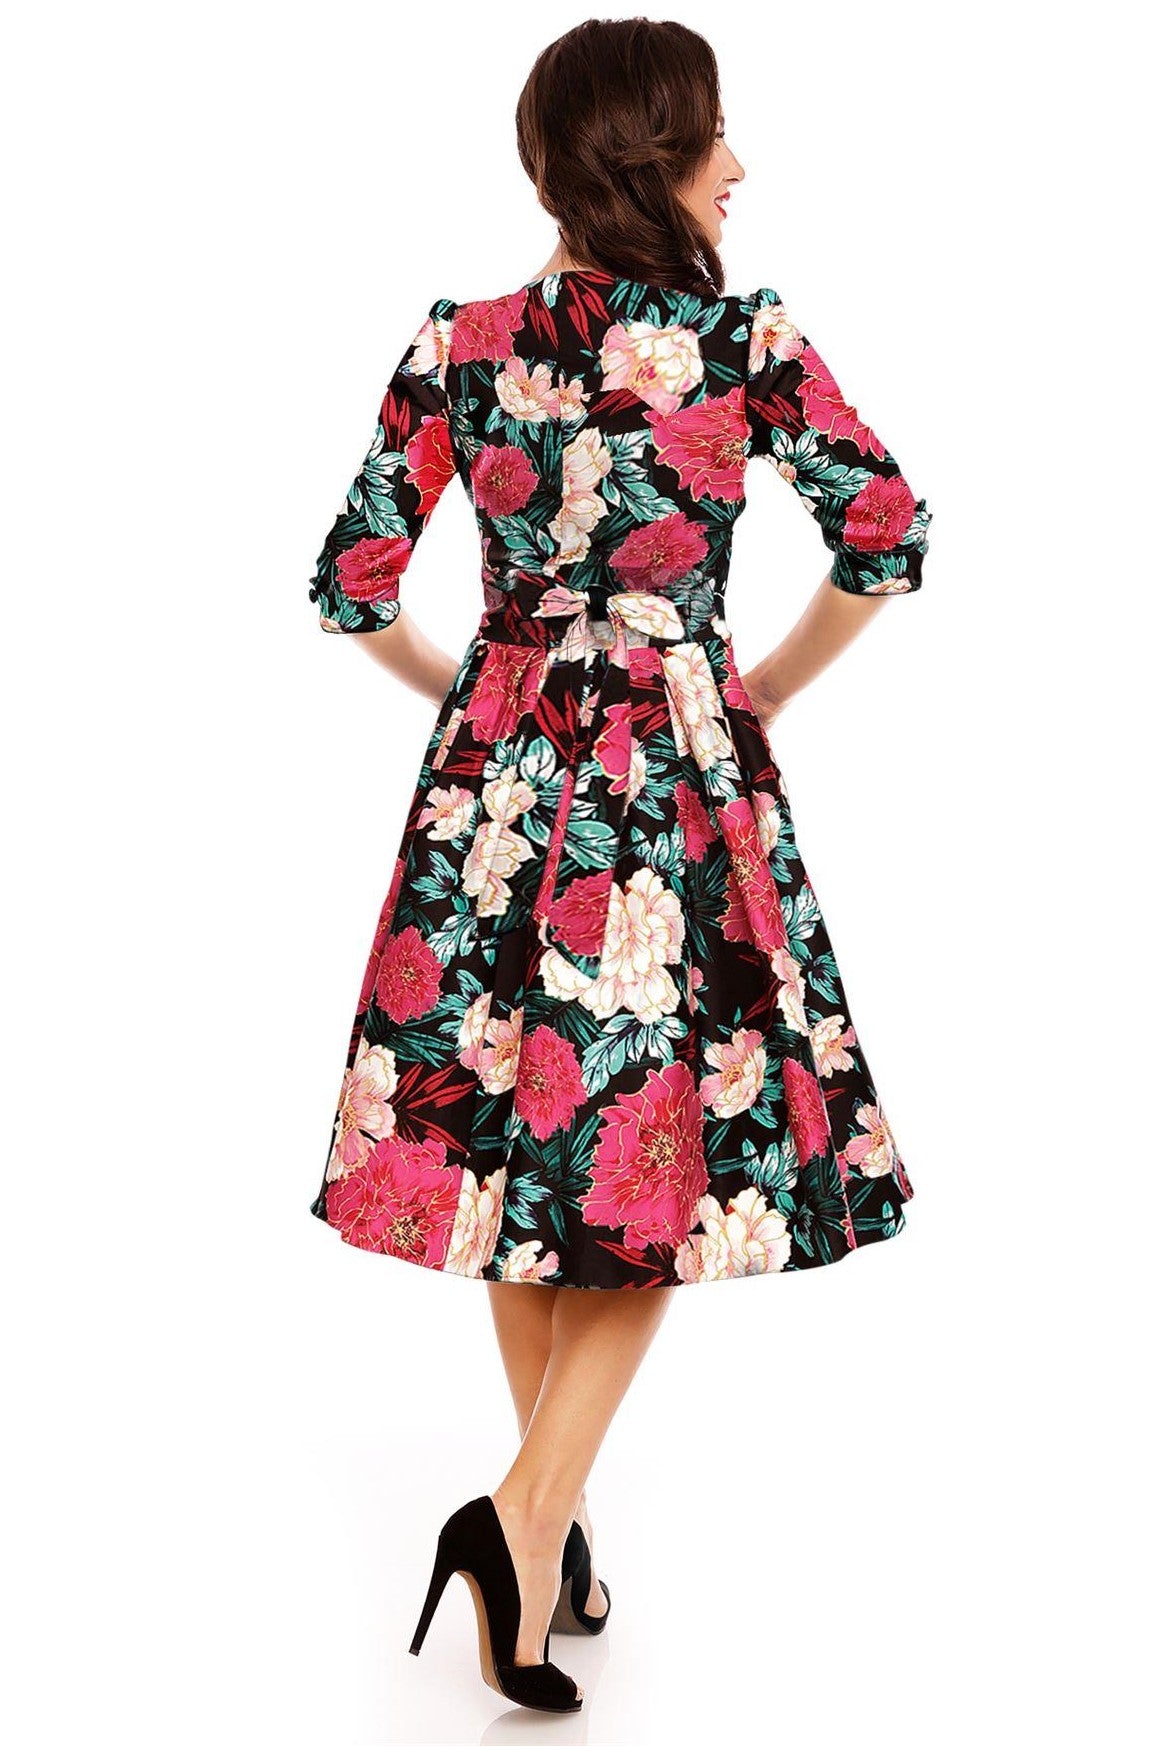 Long Sleeve 50s Swing Dress in Black-Pink-Gold Floral